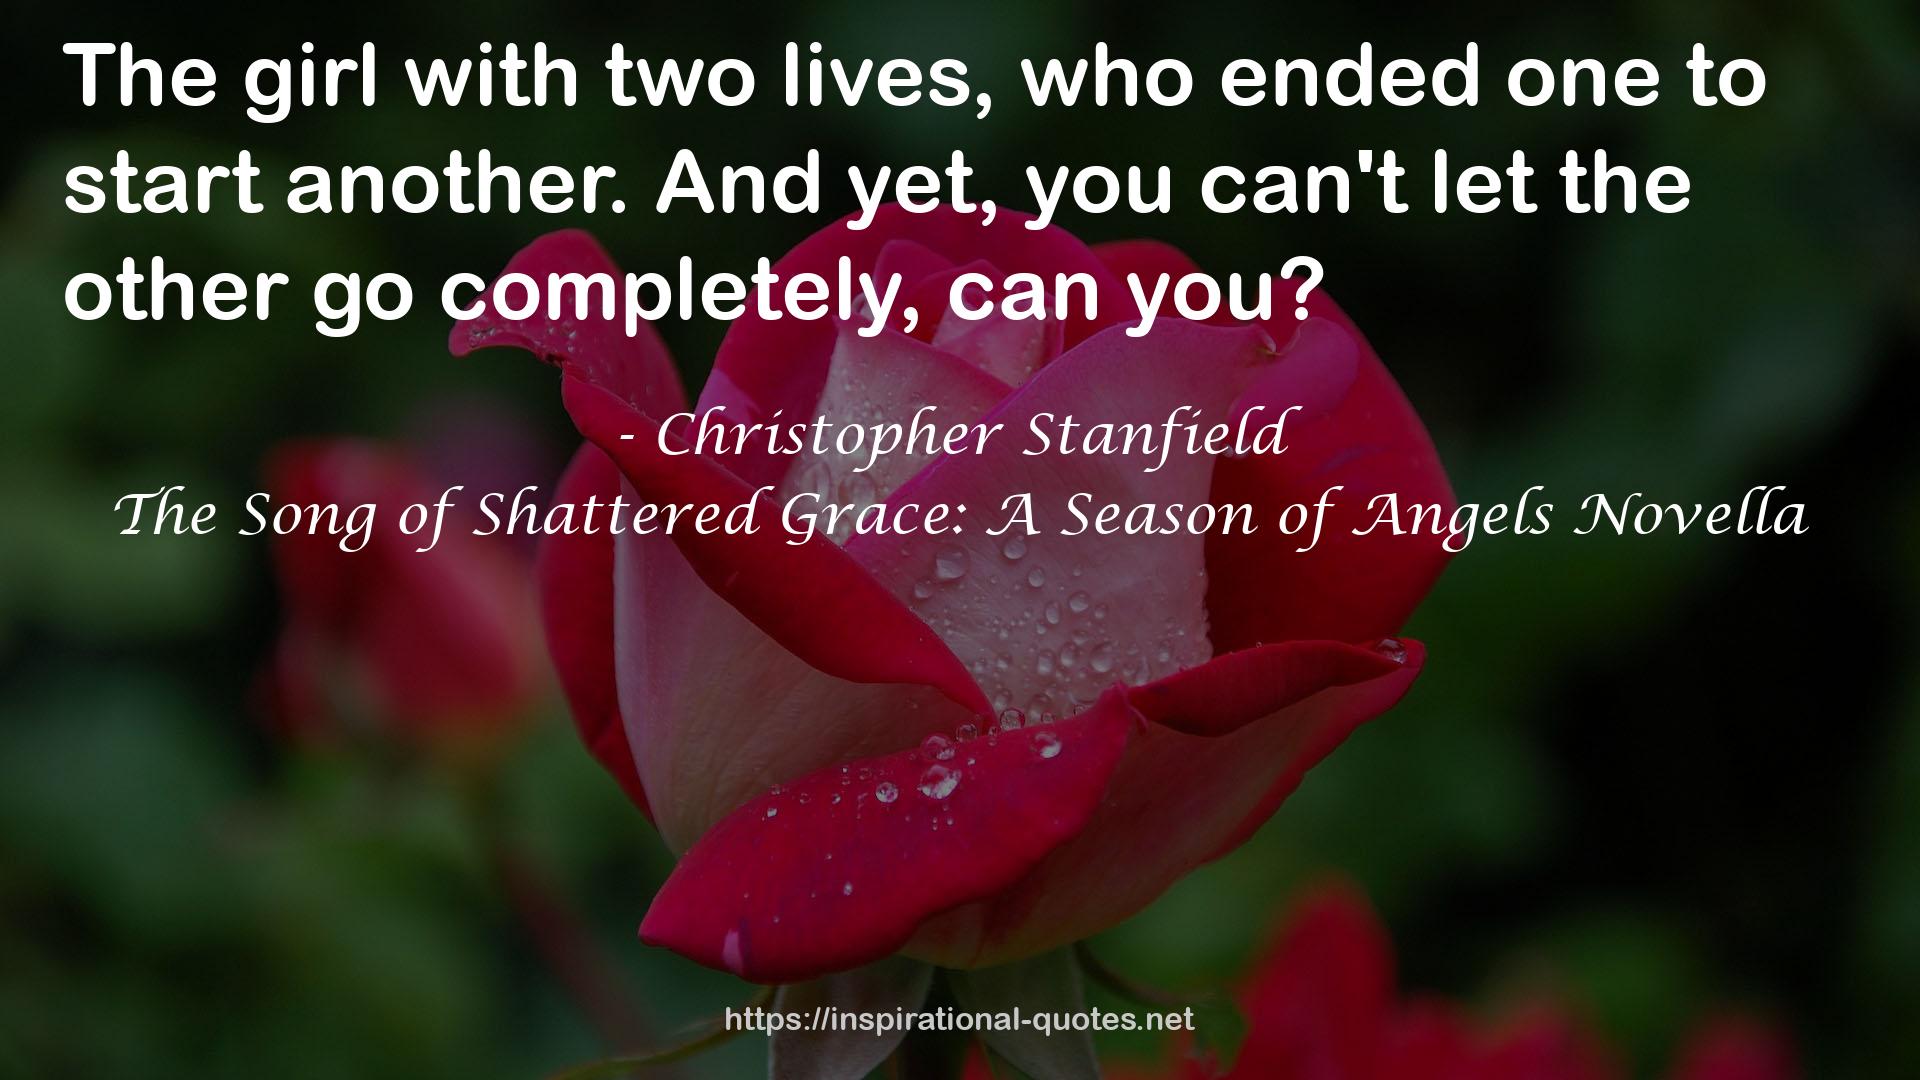 Christopher Stanfield QUOTES